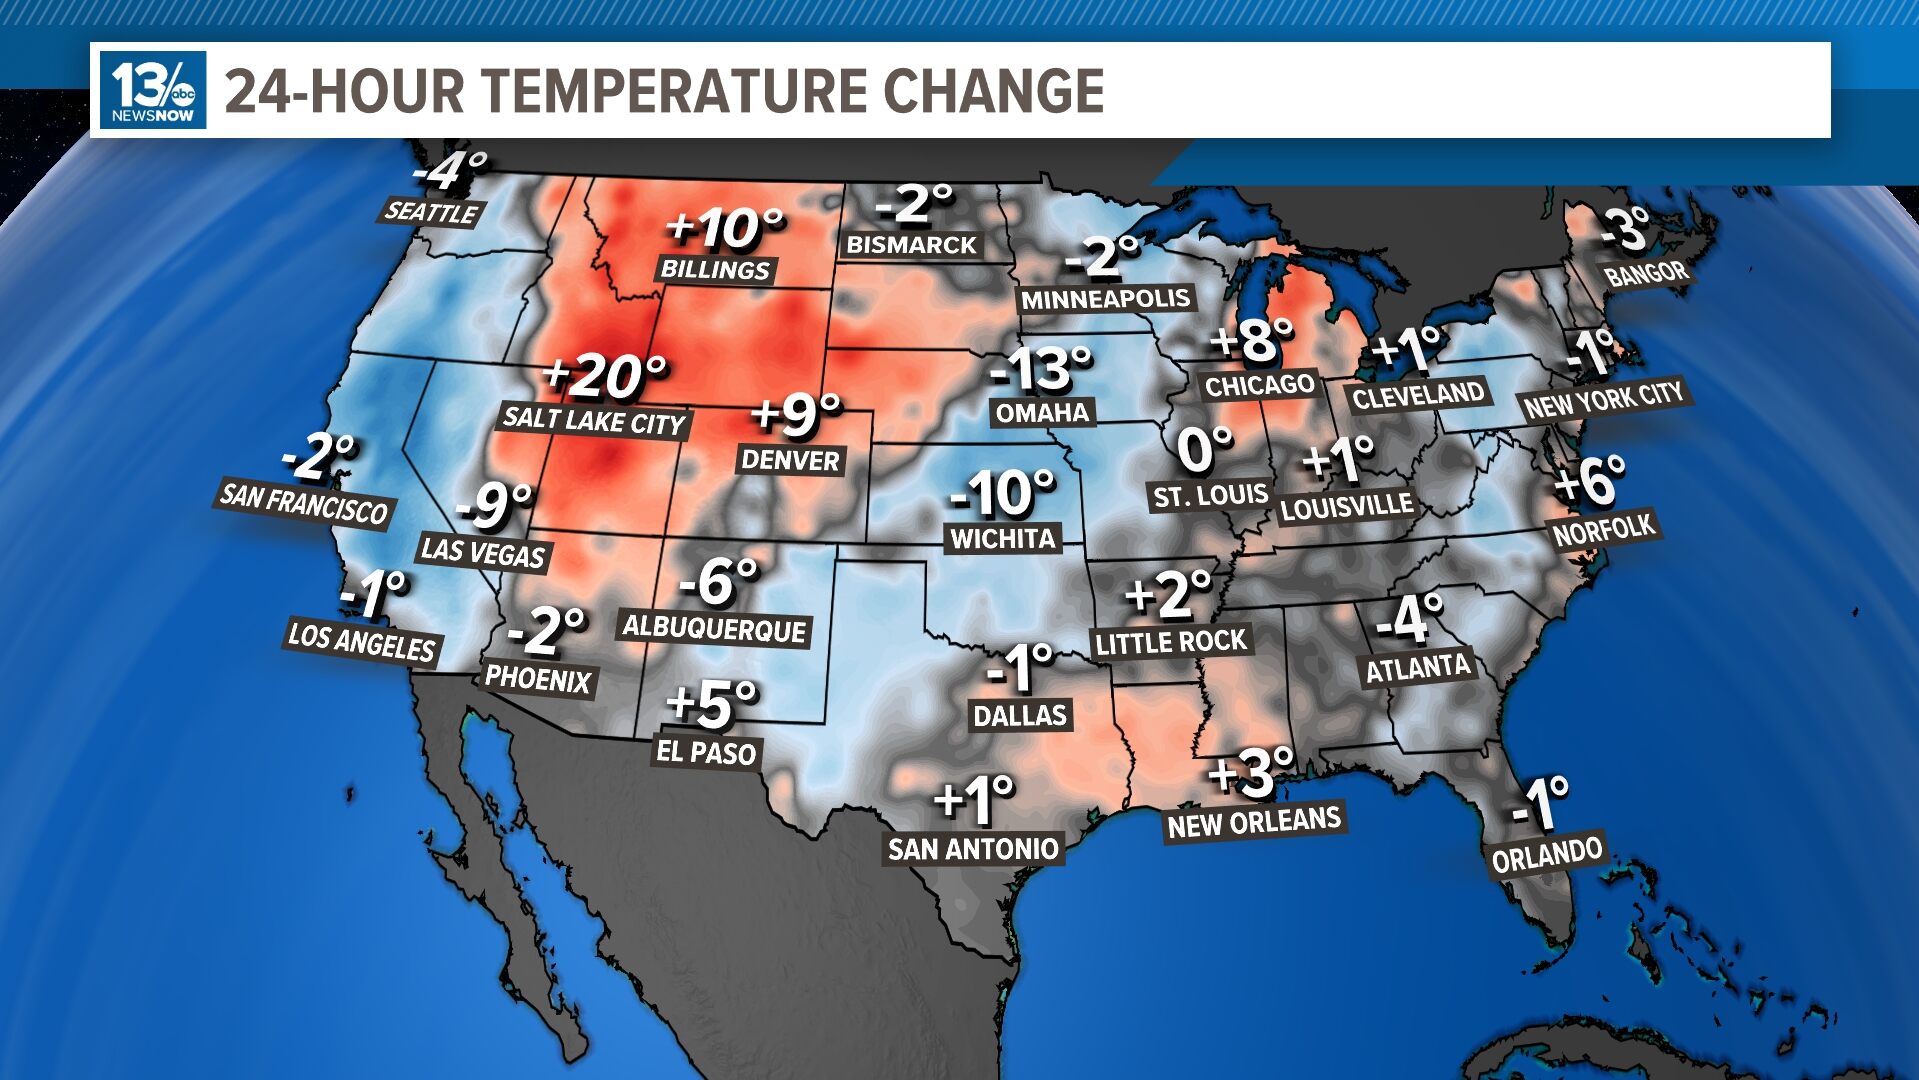 National 24 Hour Temperature Change